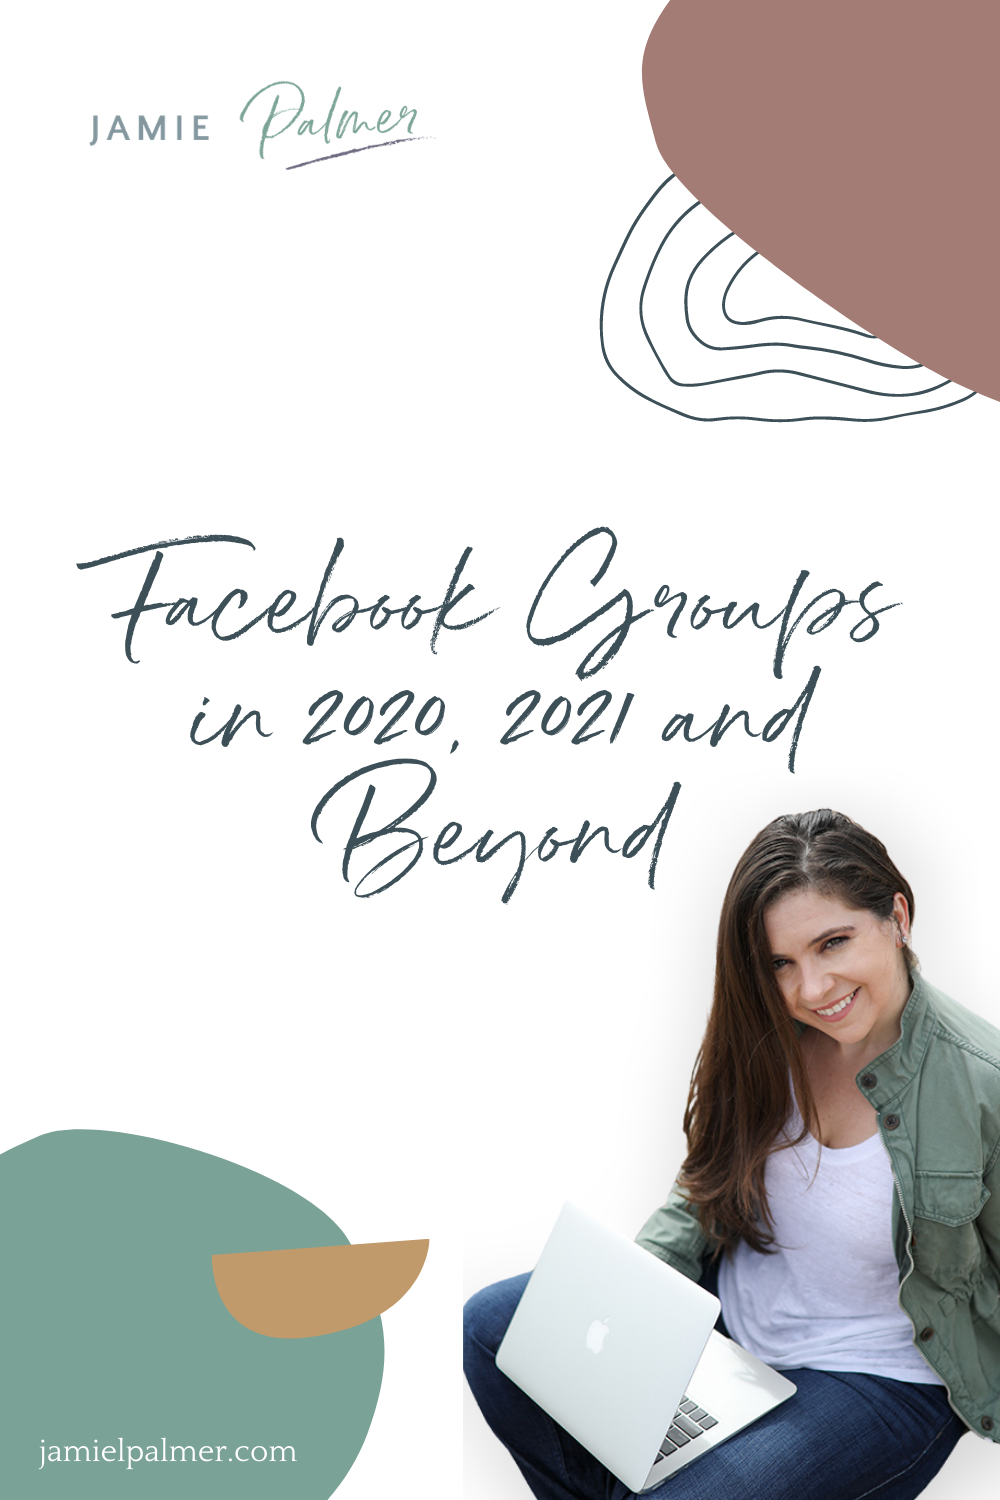 Facebook Groups in 2020 2021 and beyond